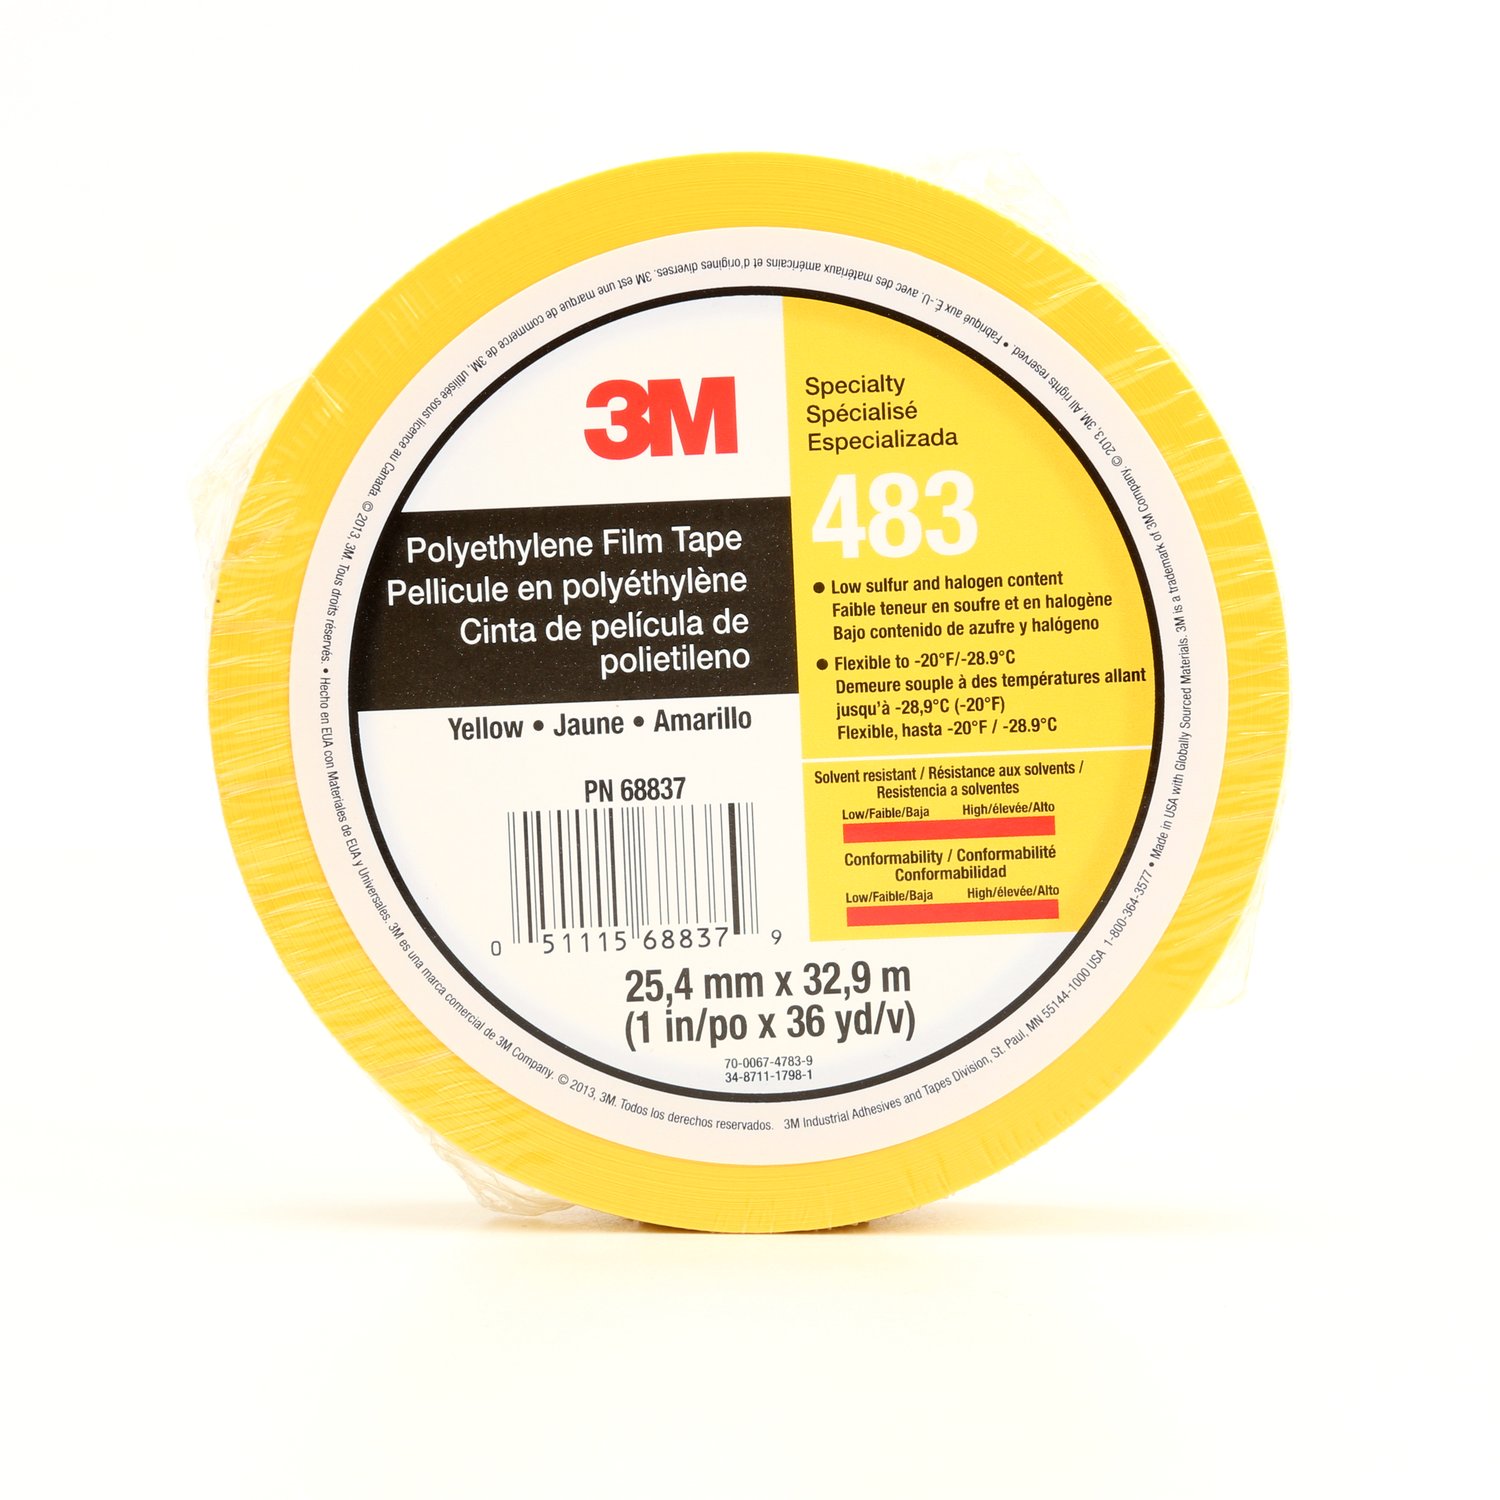 7010302434 - 3M Polyethylene Tape 483, Yellow, 1 in x 36 yd, 5.0 mil, 36 rolls per
case, Individually Wrapped Conveniently Packaged